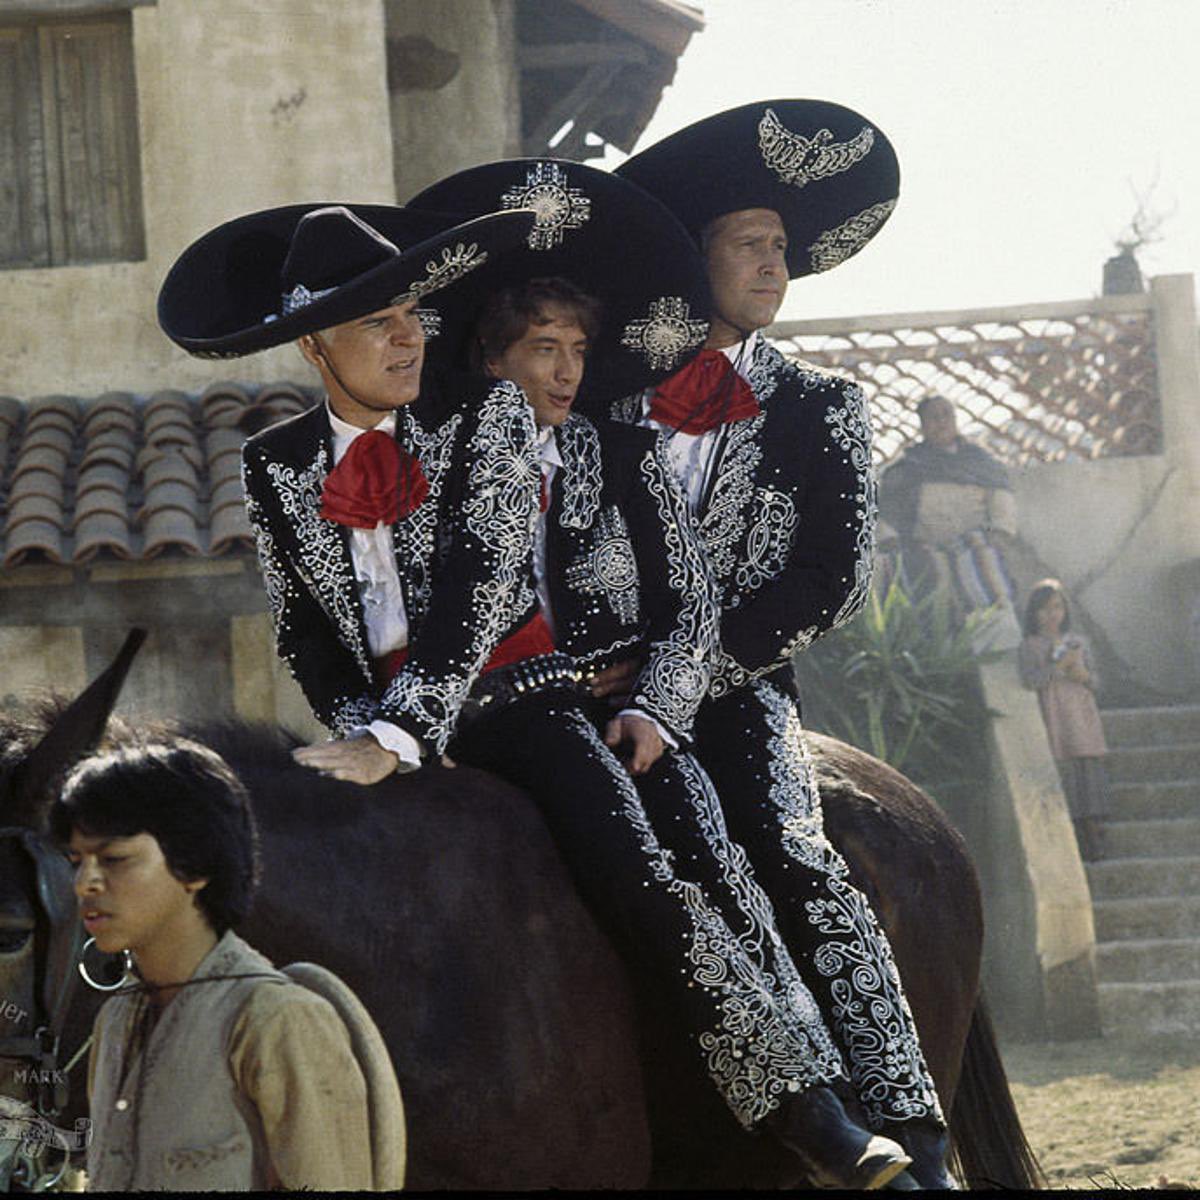 It’s High Live Tweet nightI just had an edible and I’m going to live tweet watching ¡Three Amigos! I haven’t seen it in years. This should be interesting. Join me. Join meeee